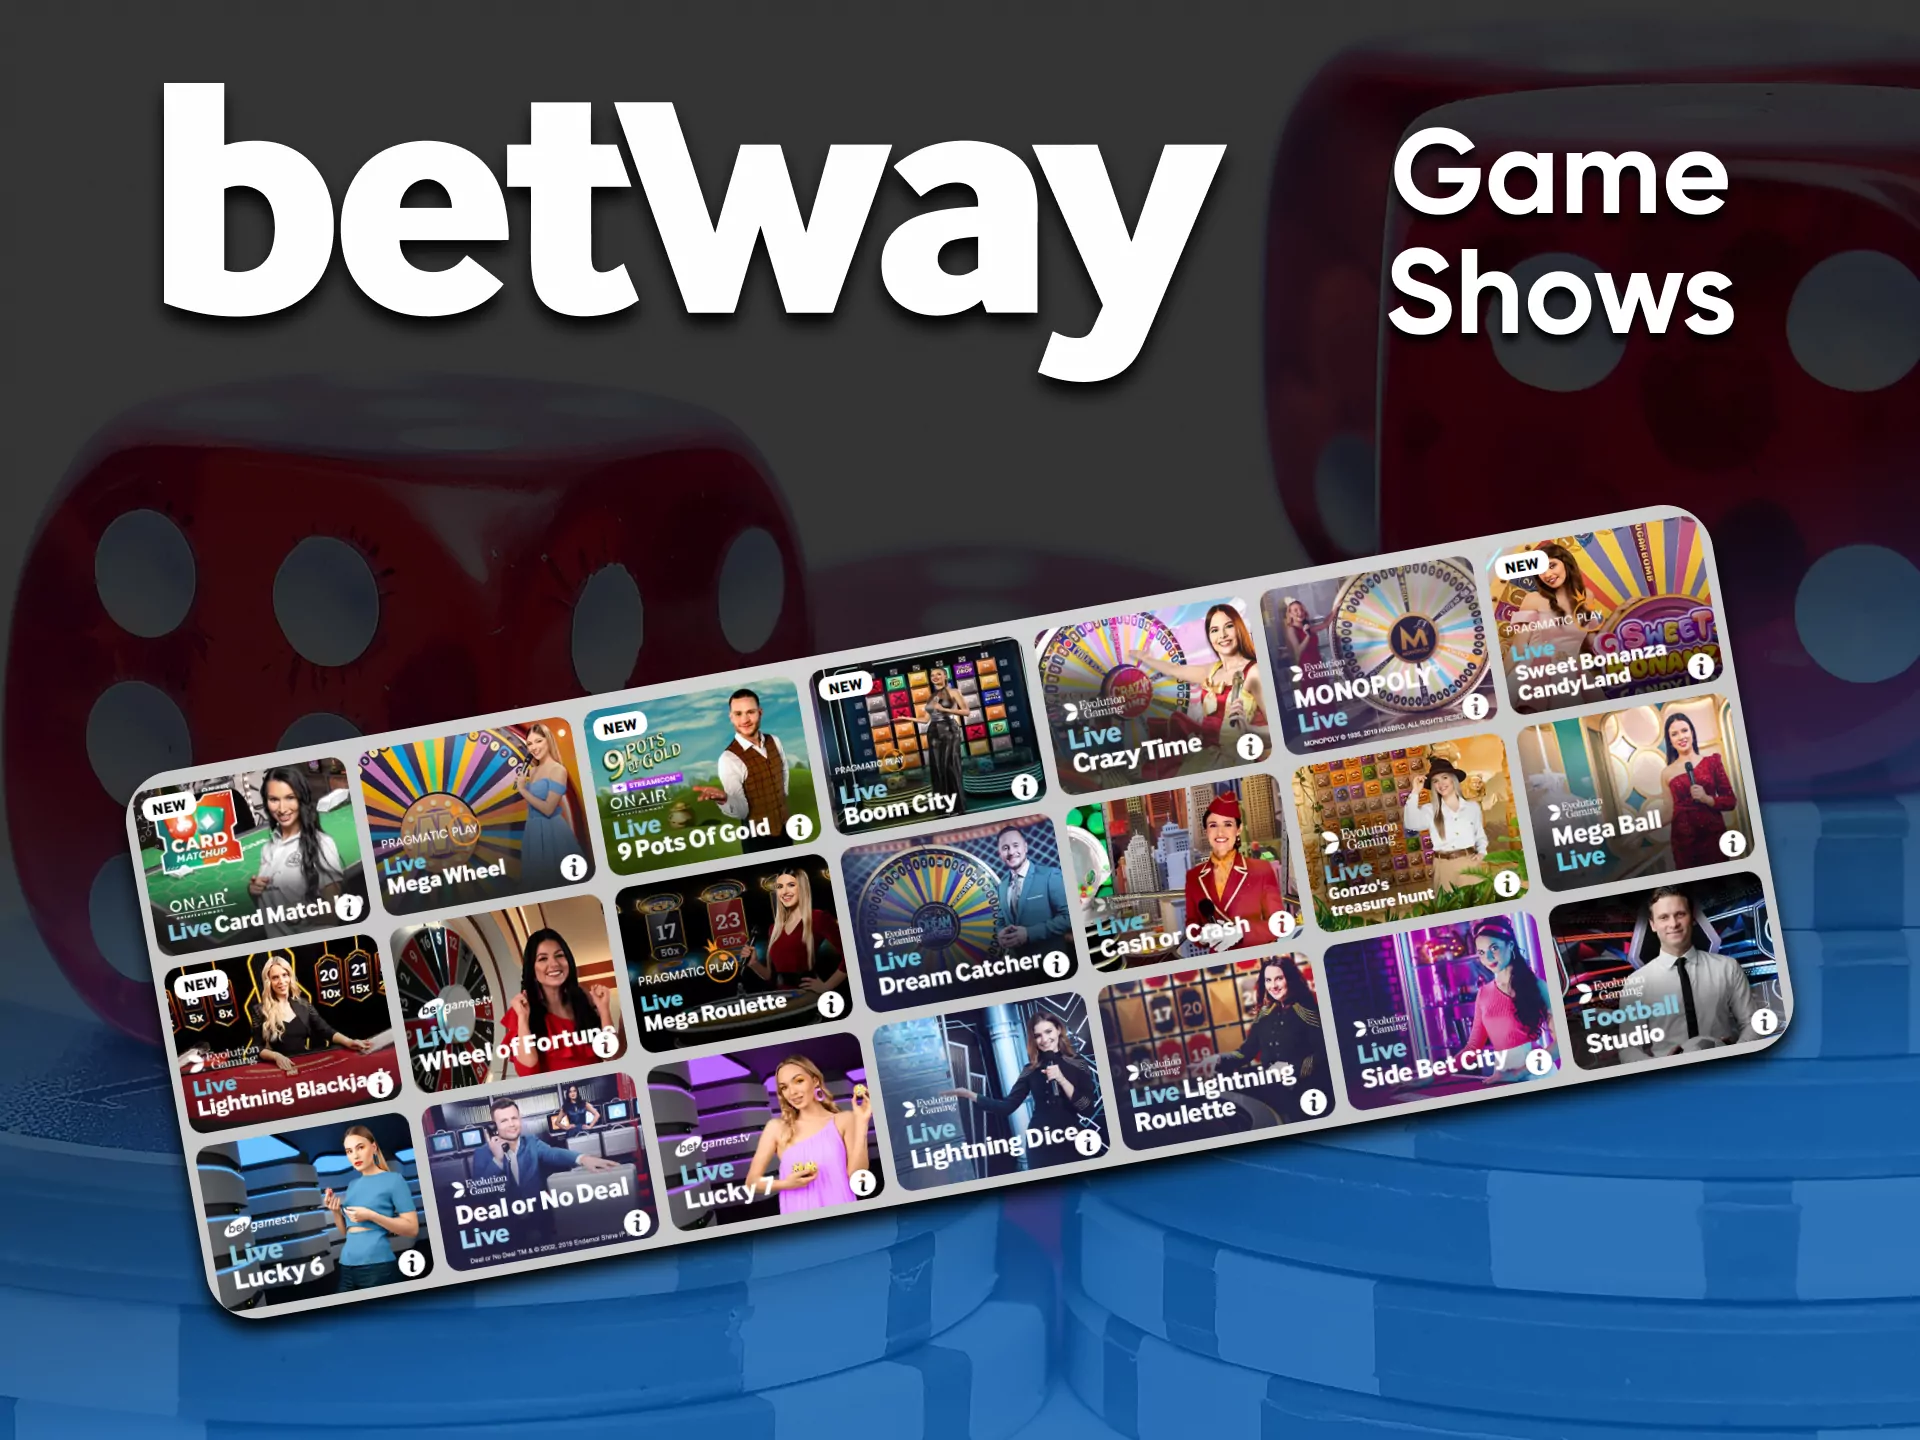 Watch Game Shows on Betway to get a huge a jackpot.